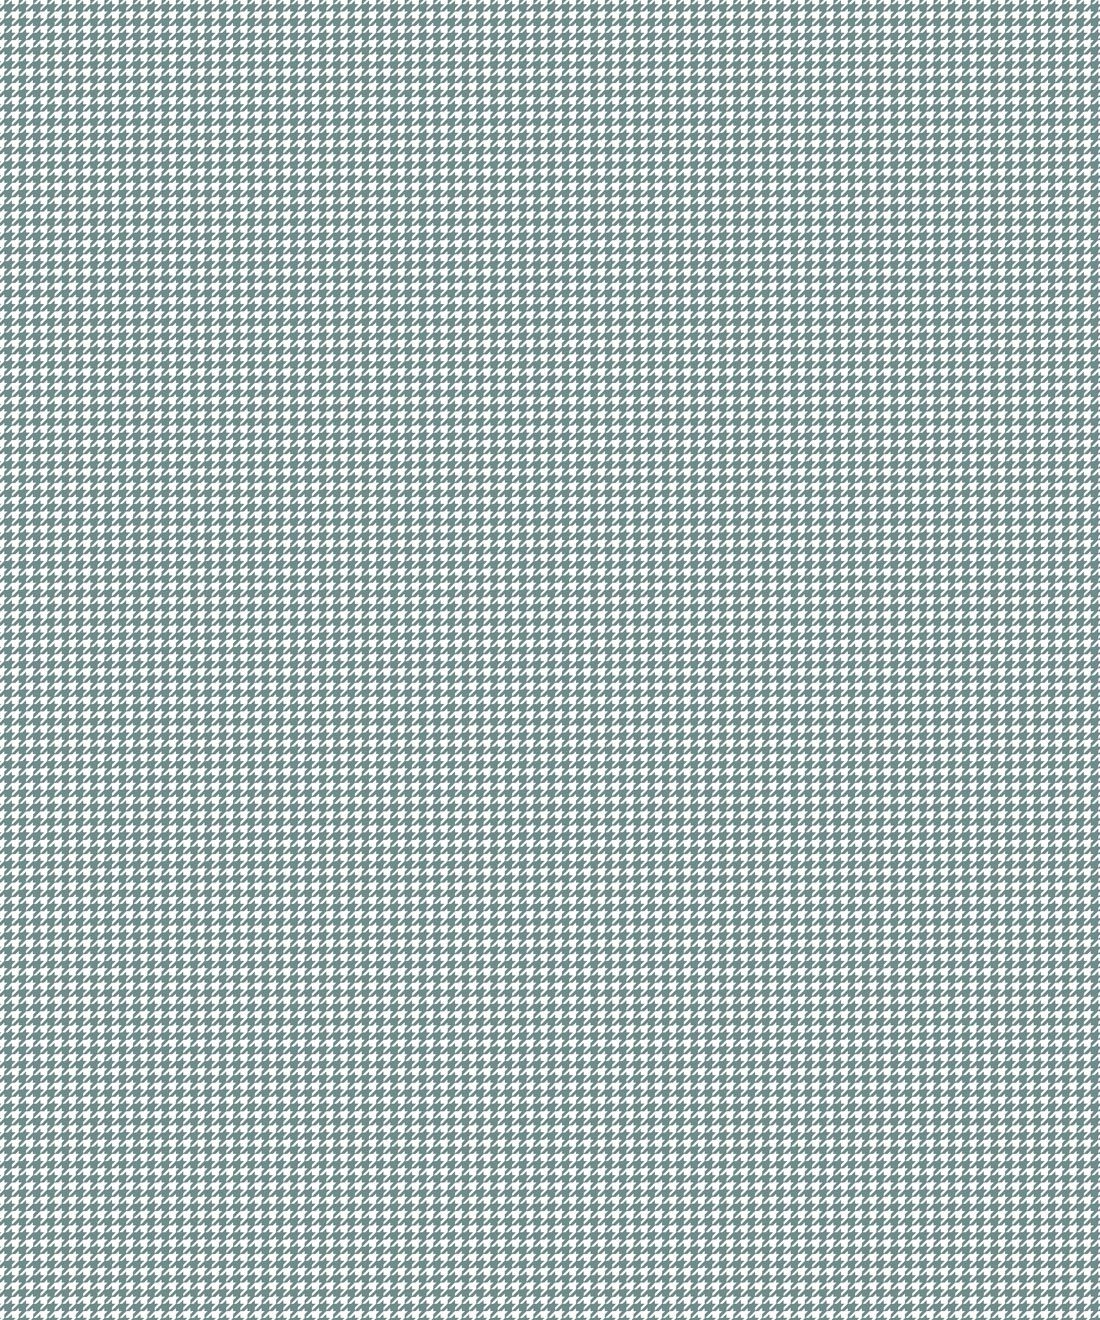 Houndstooth Wallpaper • Dogstooth Wallpaper • Pewter • Swatch